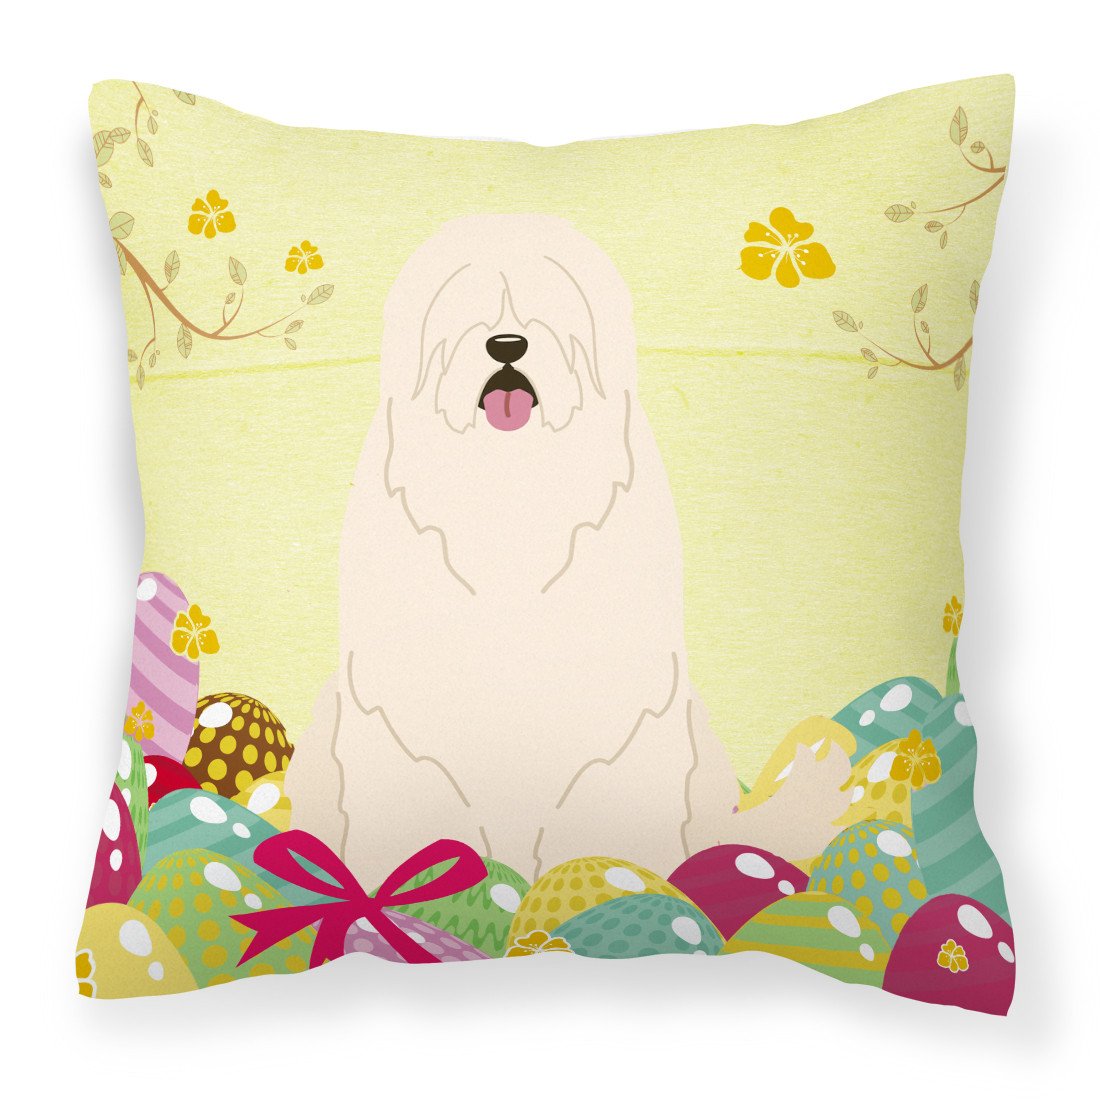 Easter Eggs South Russian Sheepdog Fabric Decorative Pillow BB6024PW1818 by Caroline's Treasures